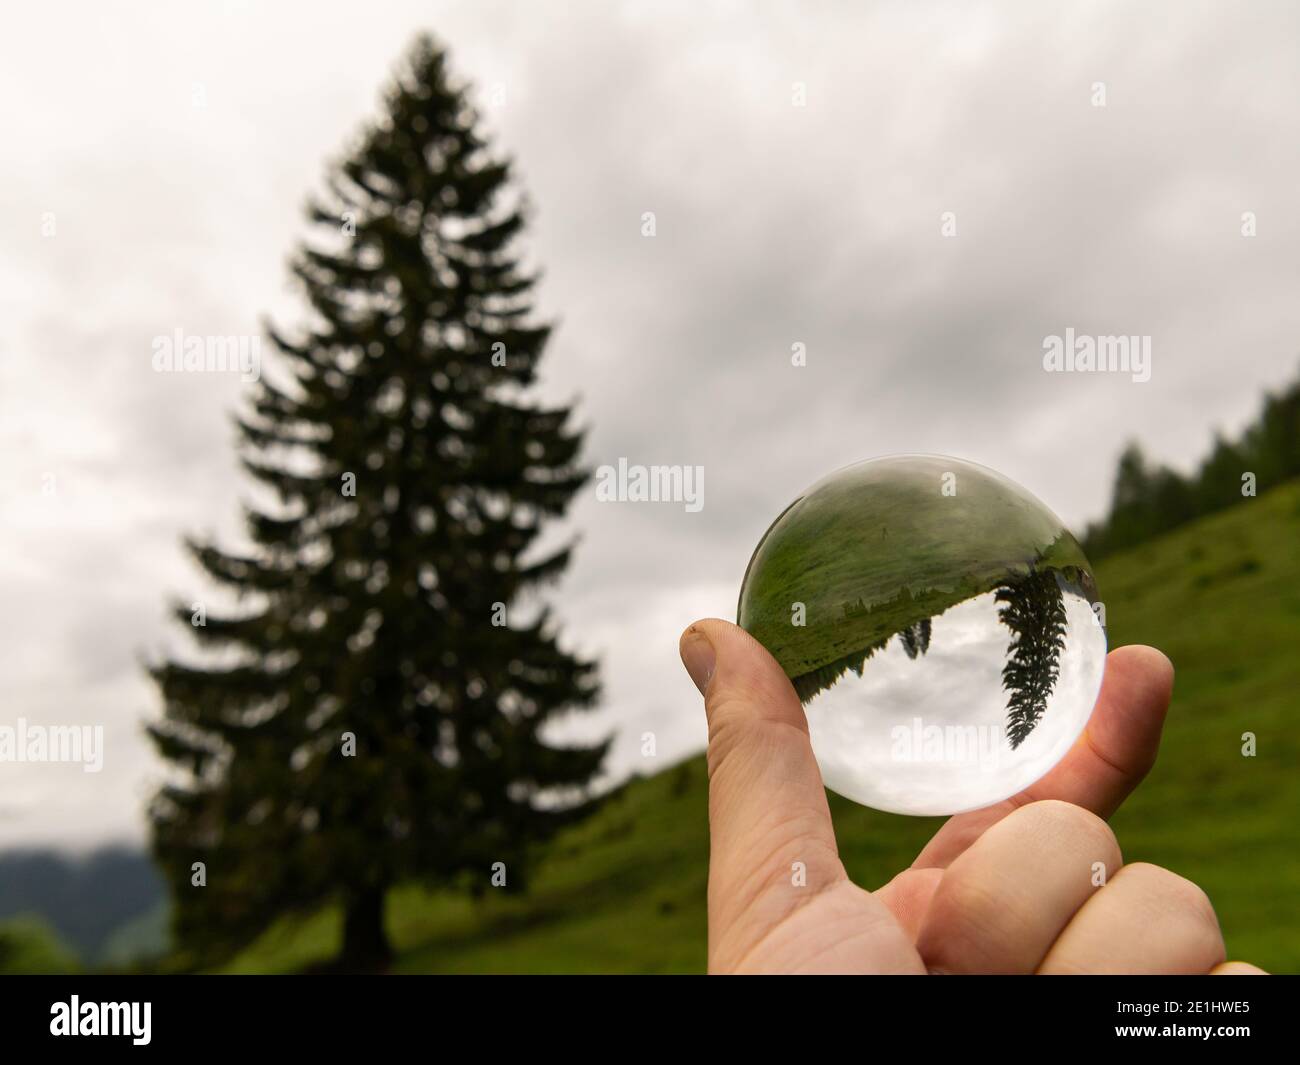 Large old solitaire spruce on a pasture in the alps, cloudy day in summer near Windischgarsten (Austria), hand holding glass sphere Stock Photo